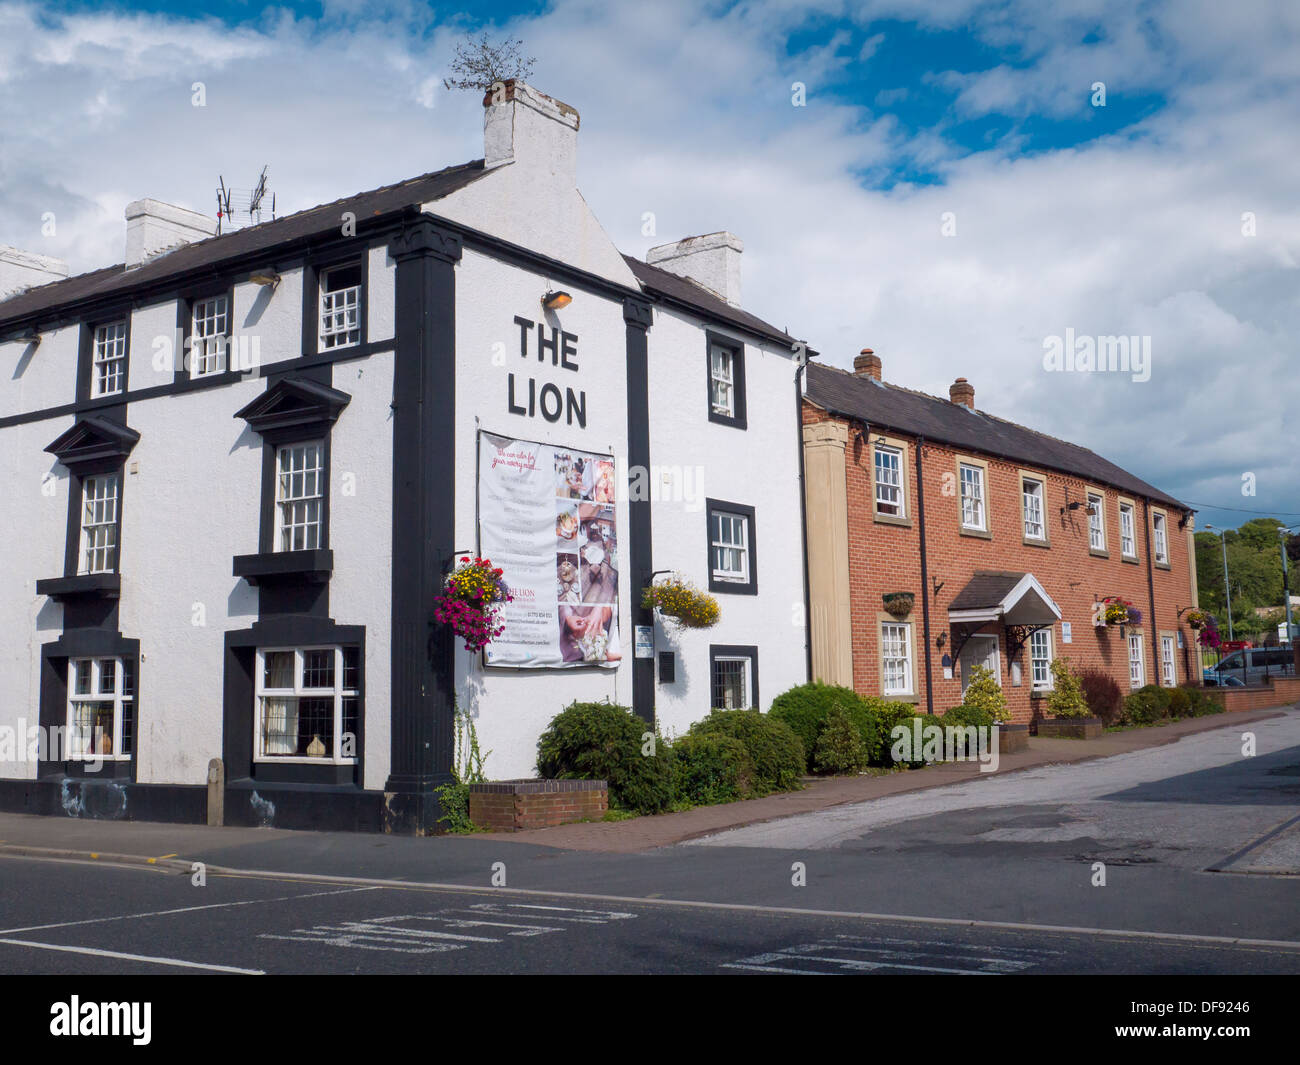 The Lion Hotel and public house in Belper, Derbyshire, United Kingdom. Stock Photo